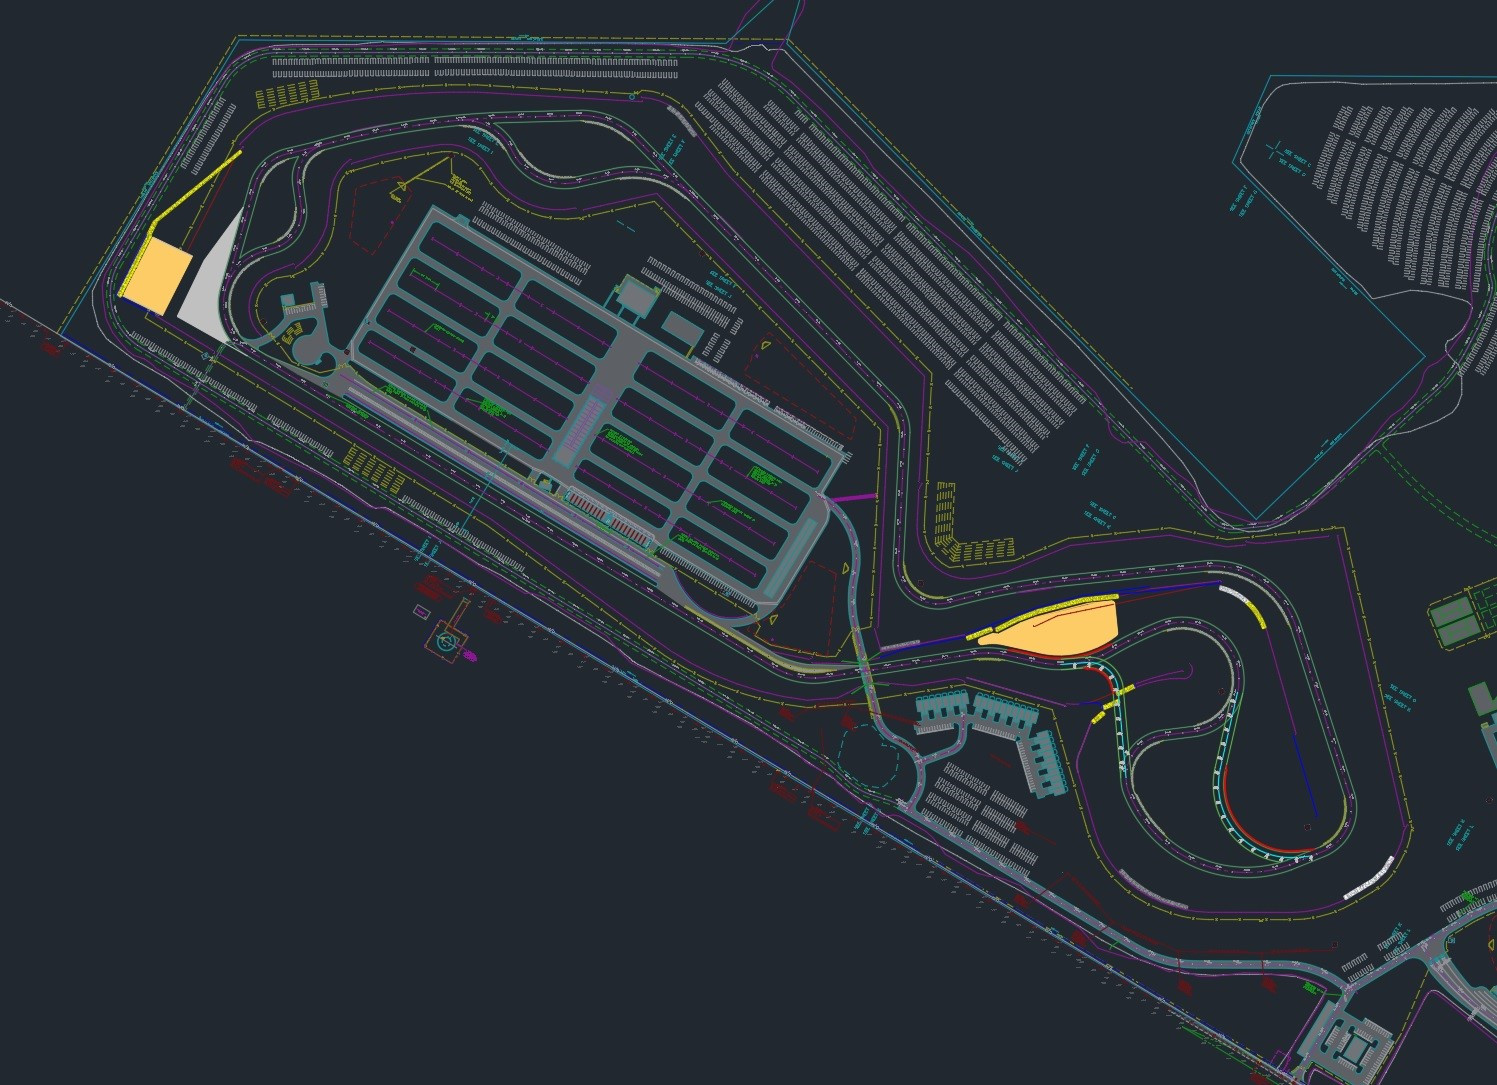 The full layout plan of the renovated Thunderbolt Raceway at New Jersey Motorsports Park. Image courtesy New Jersey Motorsports Park.